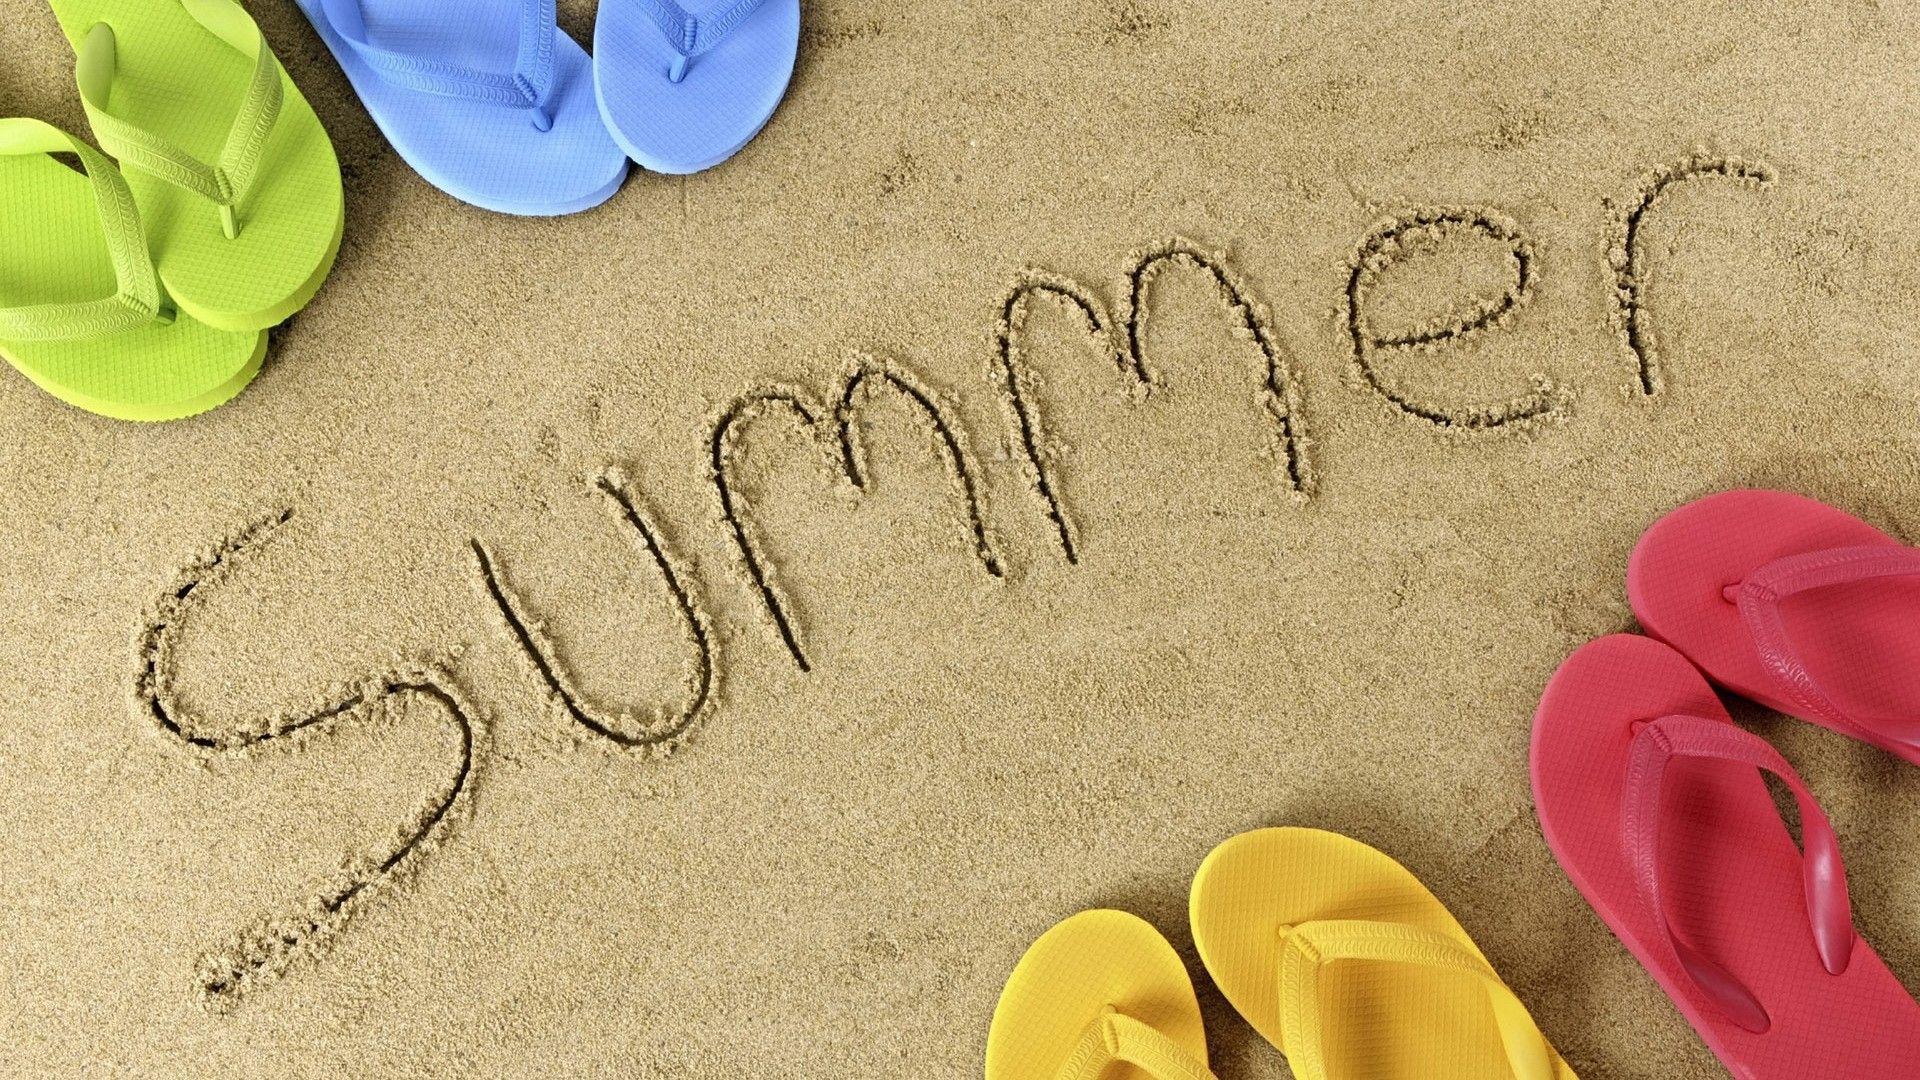 Summer Wallpaper Background 2014 HD Image 3 HD Wallpaper. Hdimges